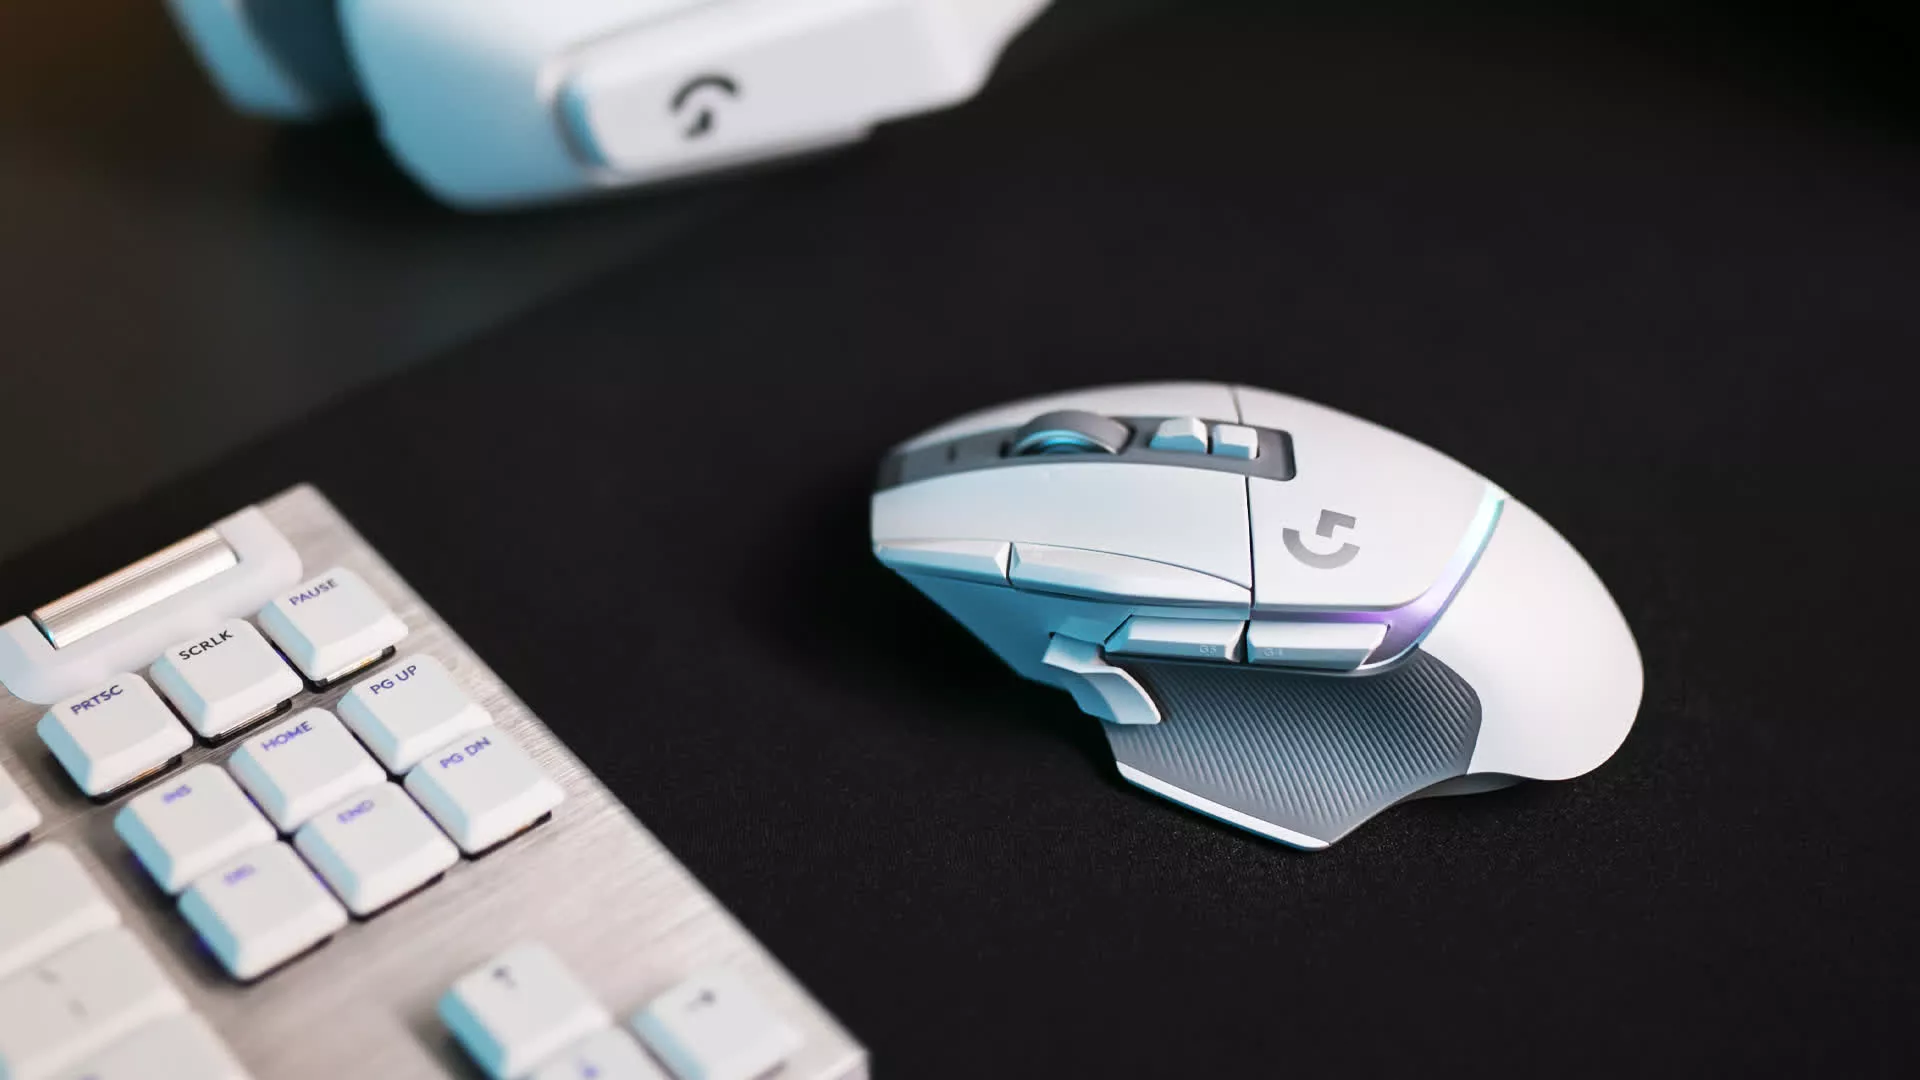 Logitech's new G502 X gaming mice come with optical-mechanical switches, refined designs